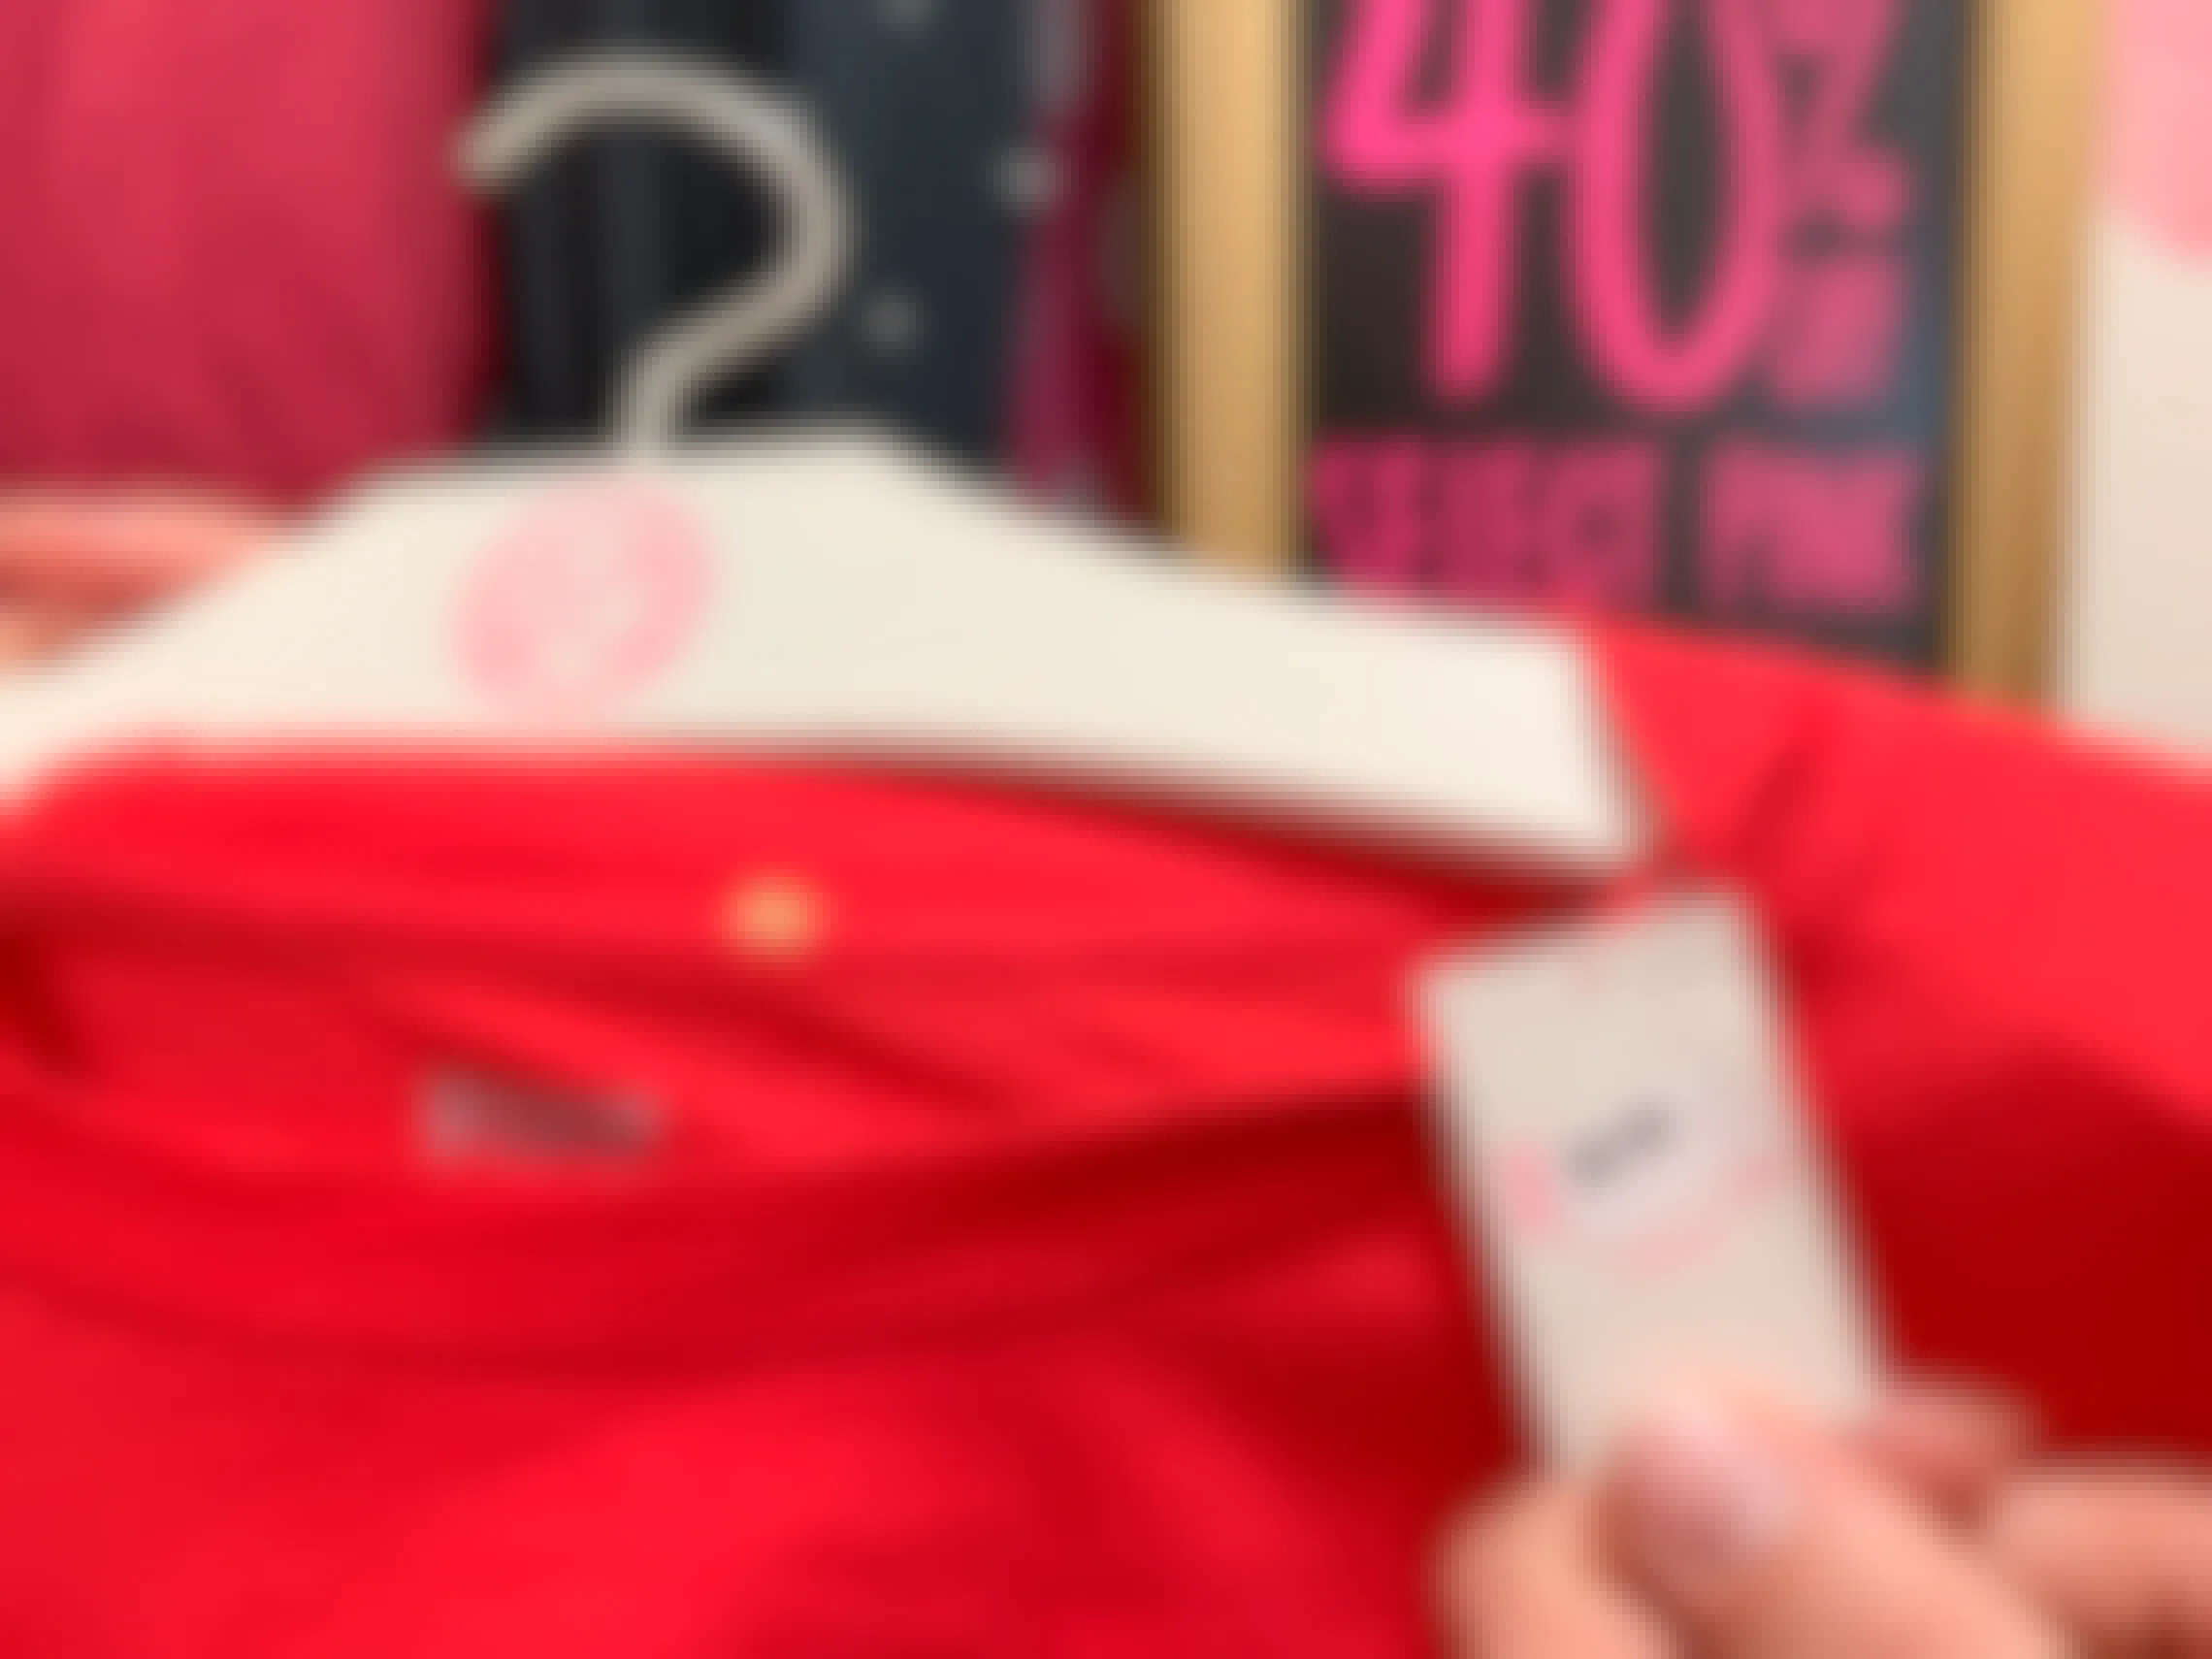 A Pink clearance price tag on a red shirt with a 40% off Select Pink sign behind.